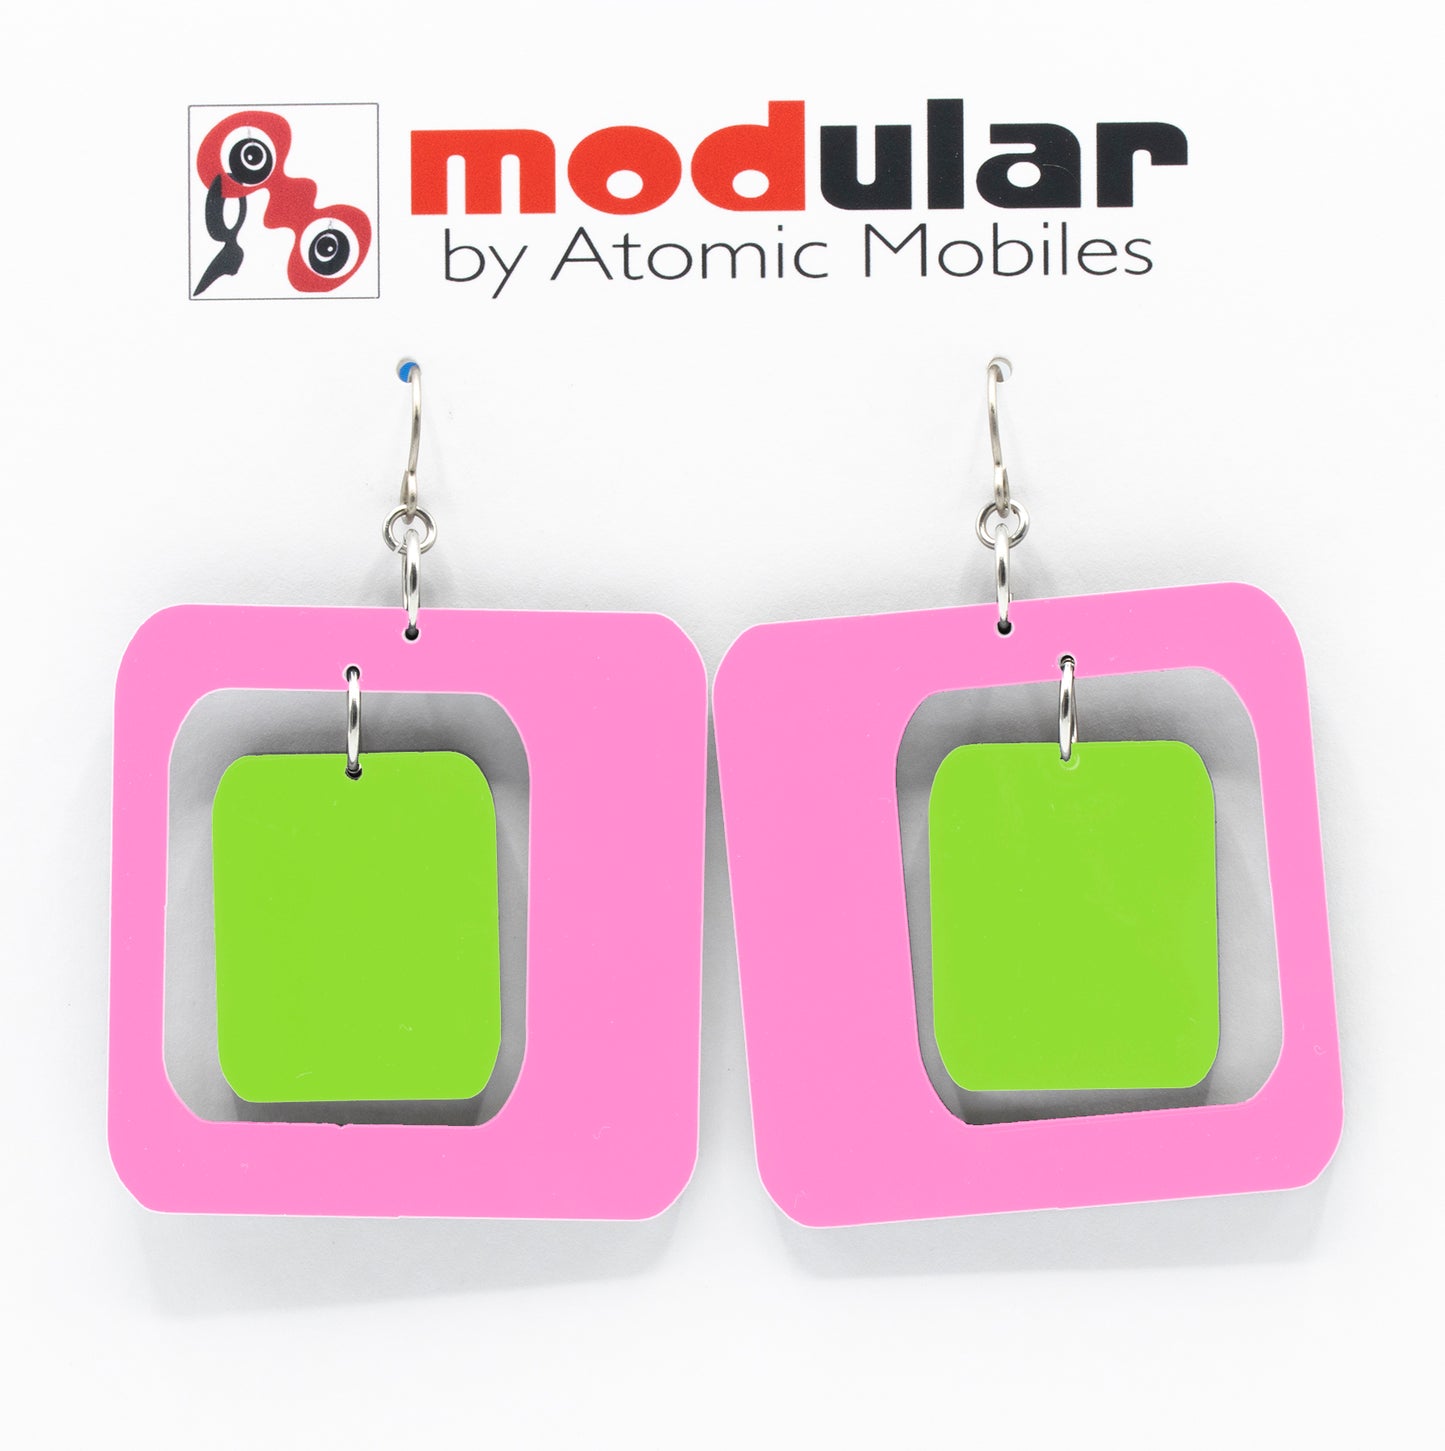 MODular Earrings - Coolsville Statement Earrings in Hot Pink and Lime by AtomicMobiles.com - retro era inspired mod handmade jewelry